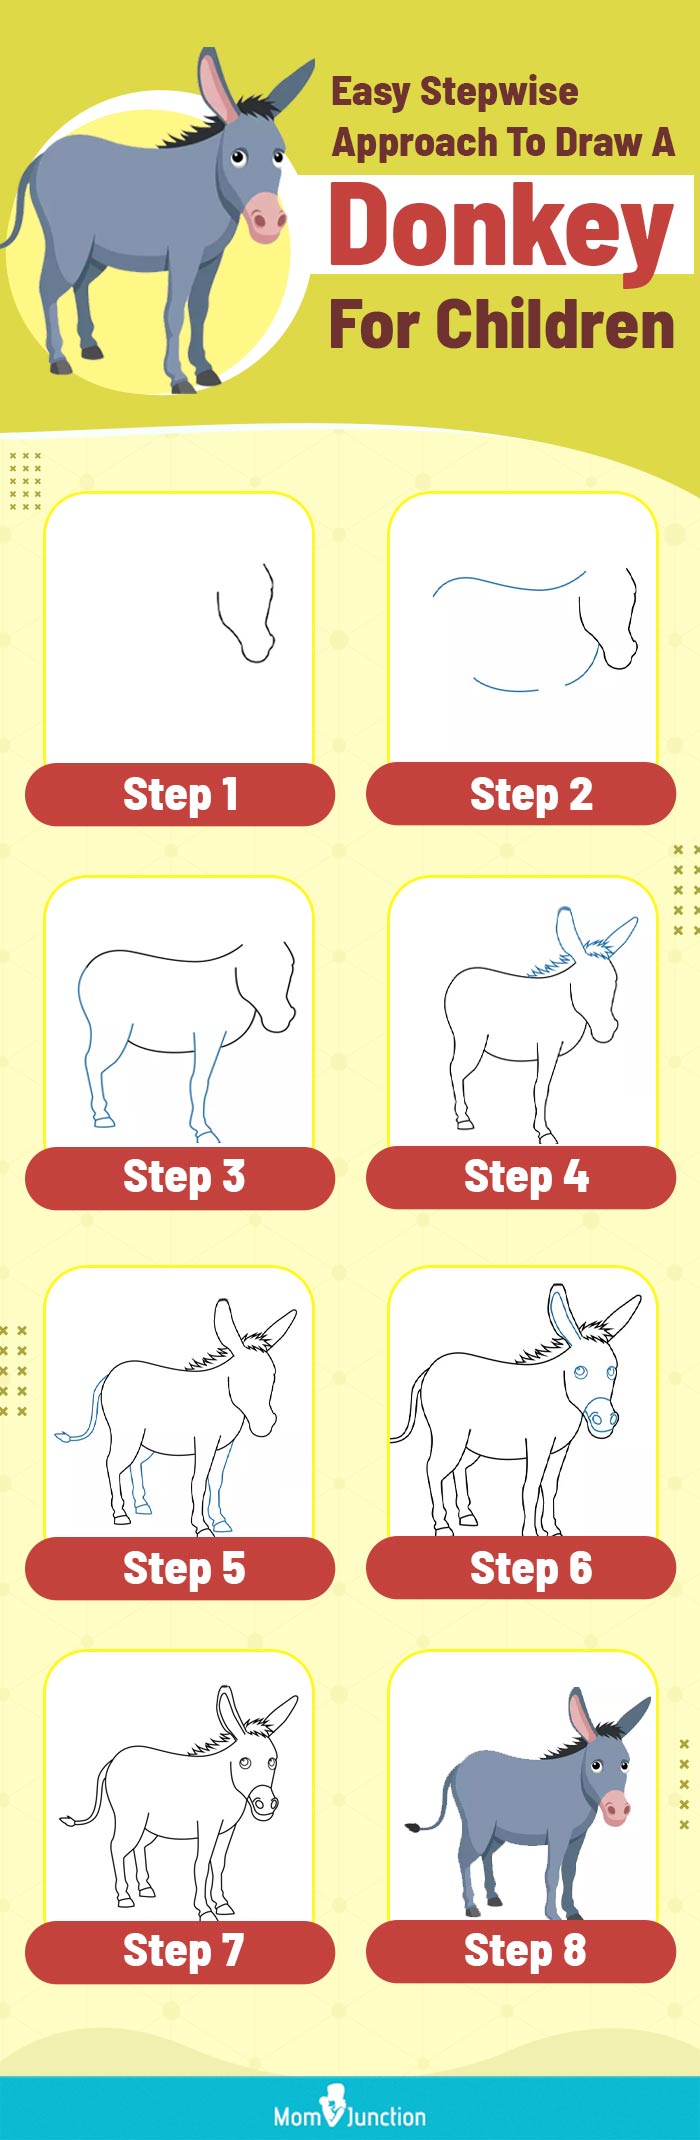 easy stepwise approach to draw a donkey for children (infographic)